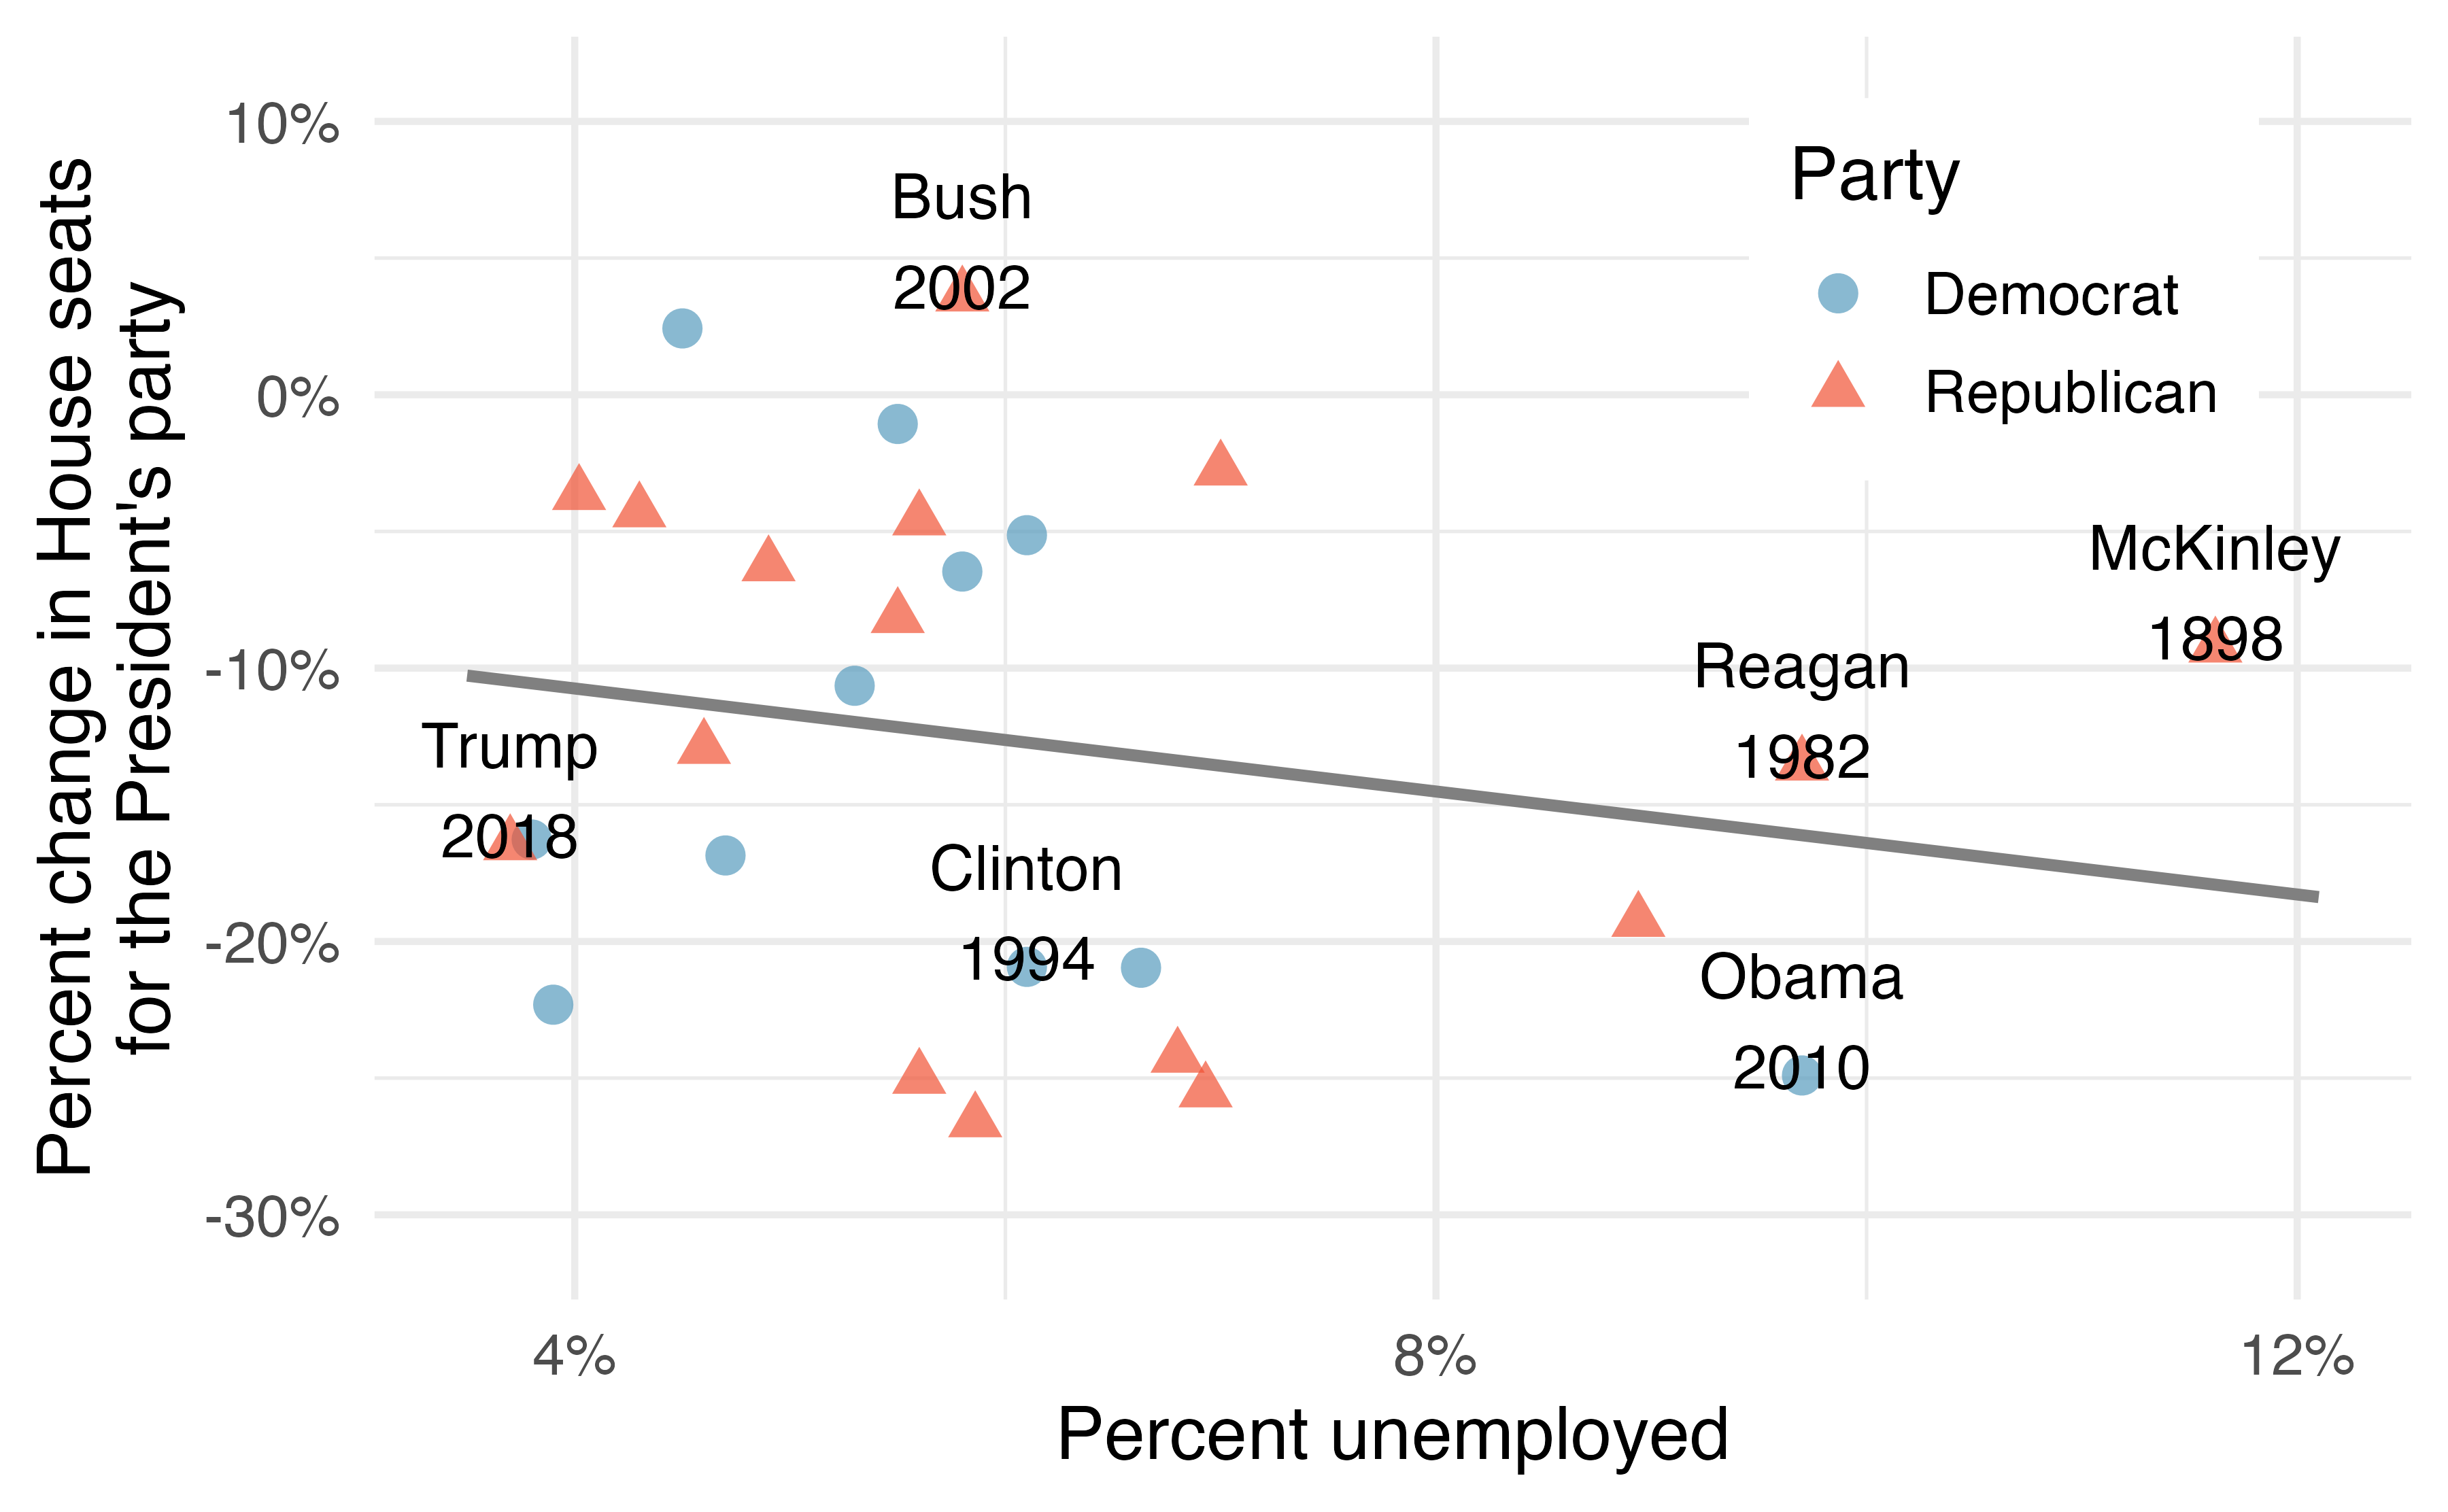 Scatterplot with percent unemployed on the x-axis and percent change in House seats for the President's party on the y-axis. Each point represents a different President's midterm and is colored according to their political party (Democrat or Republican). The relationship is moderate and negative.